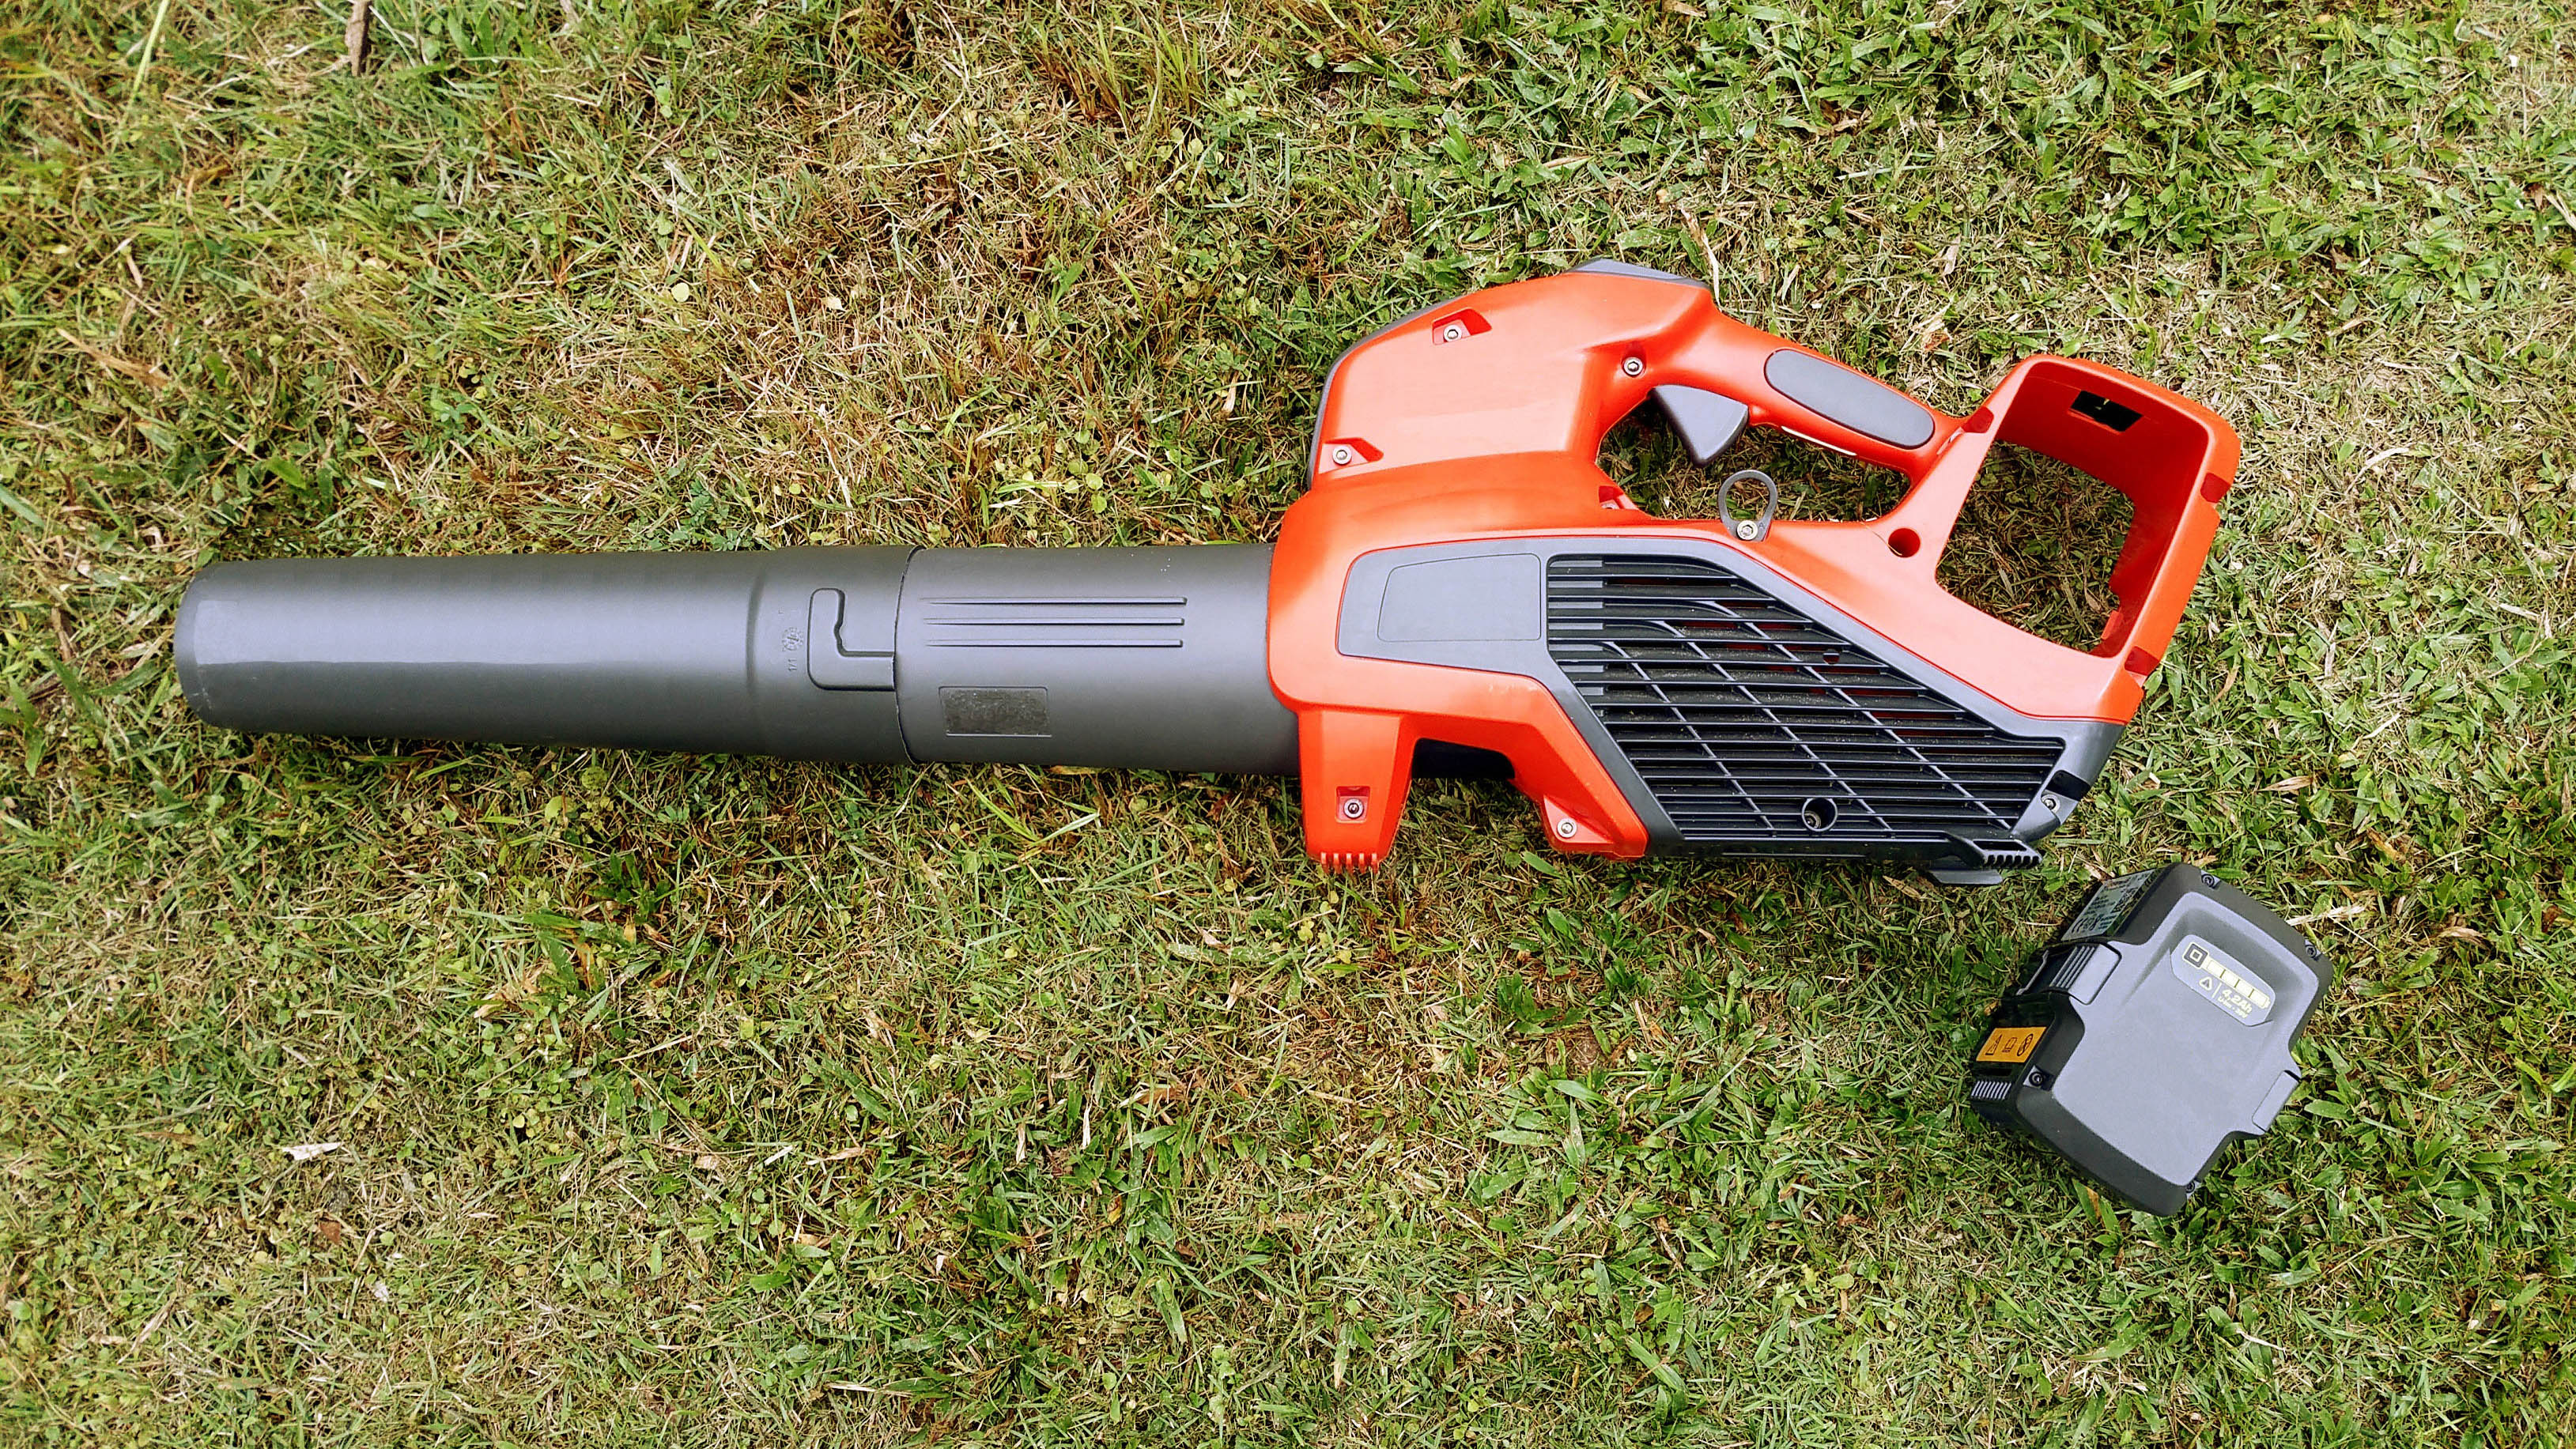 Leaf blower and battery on grass